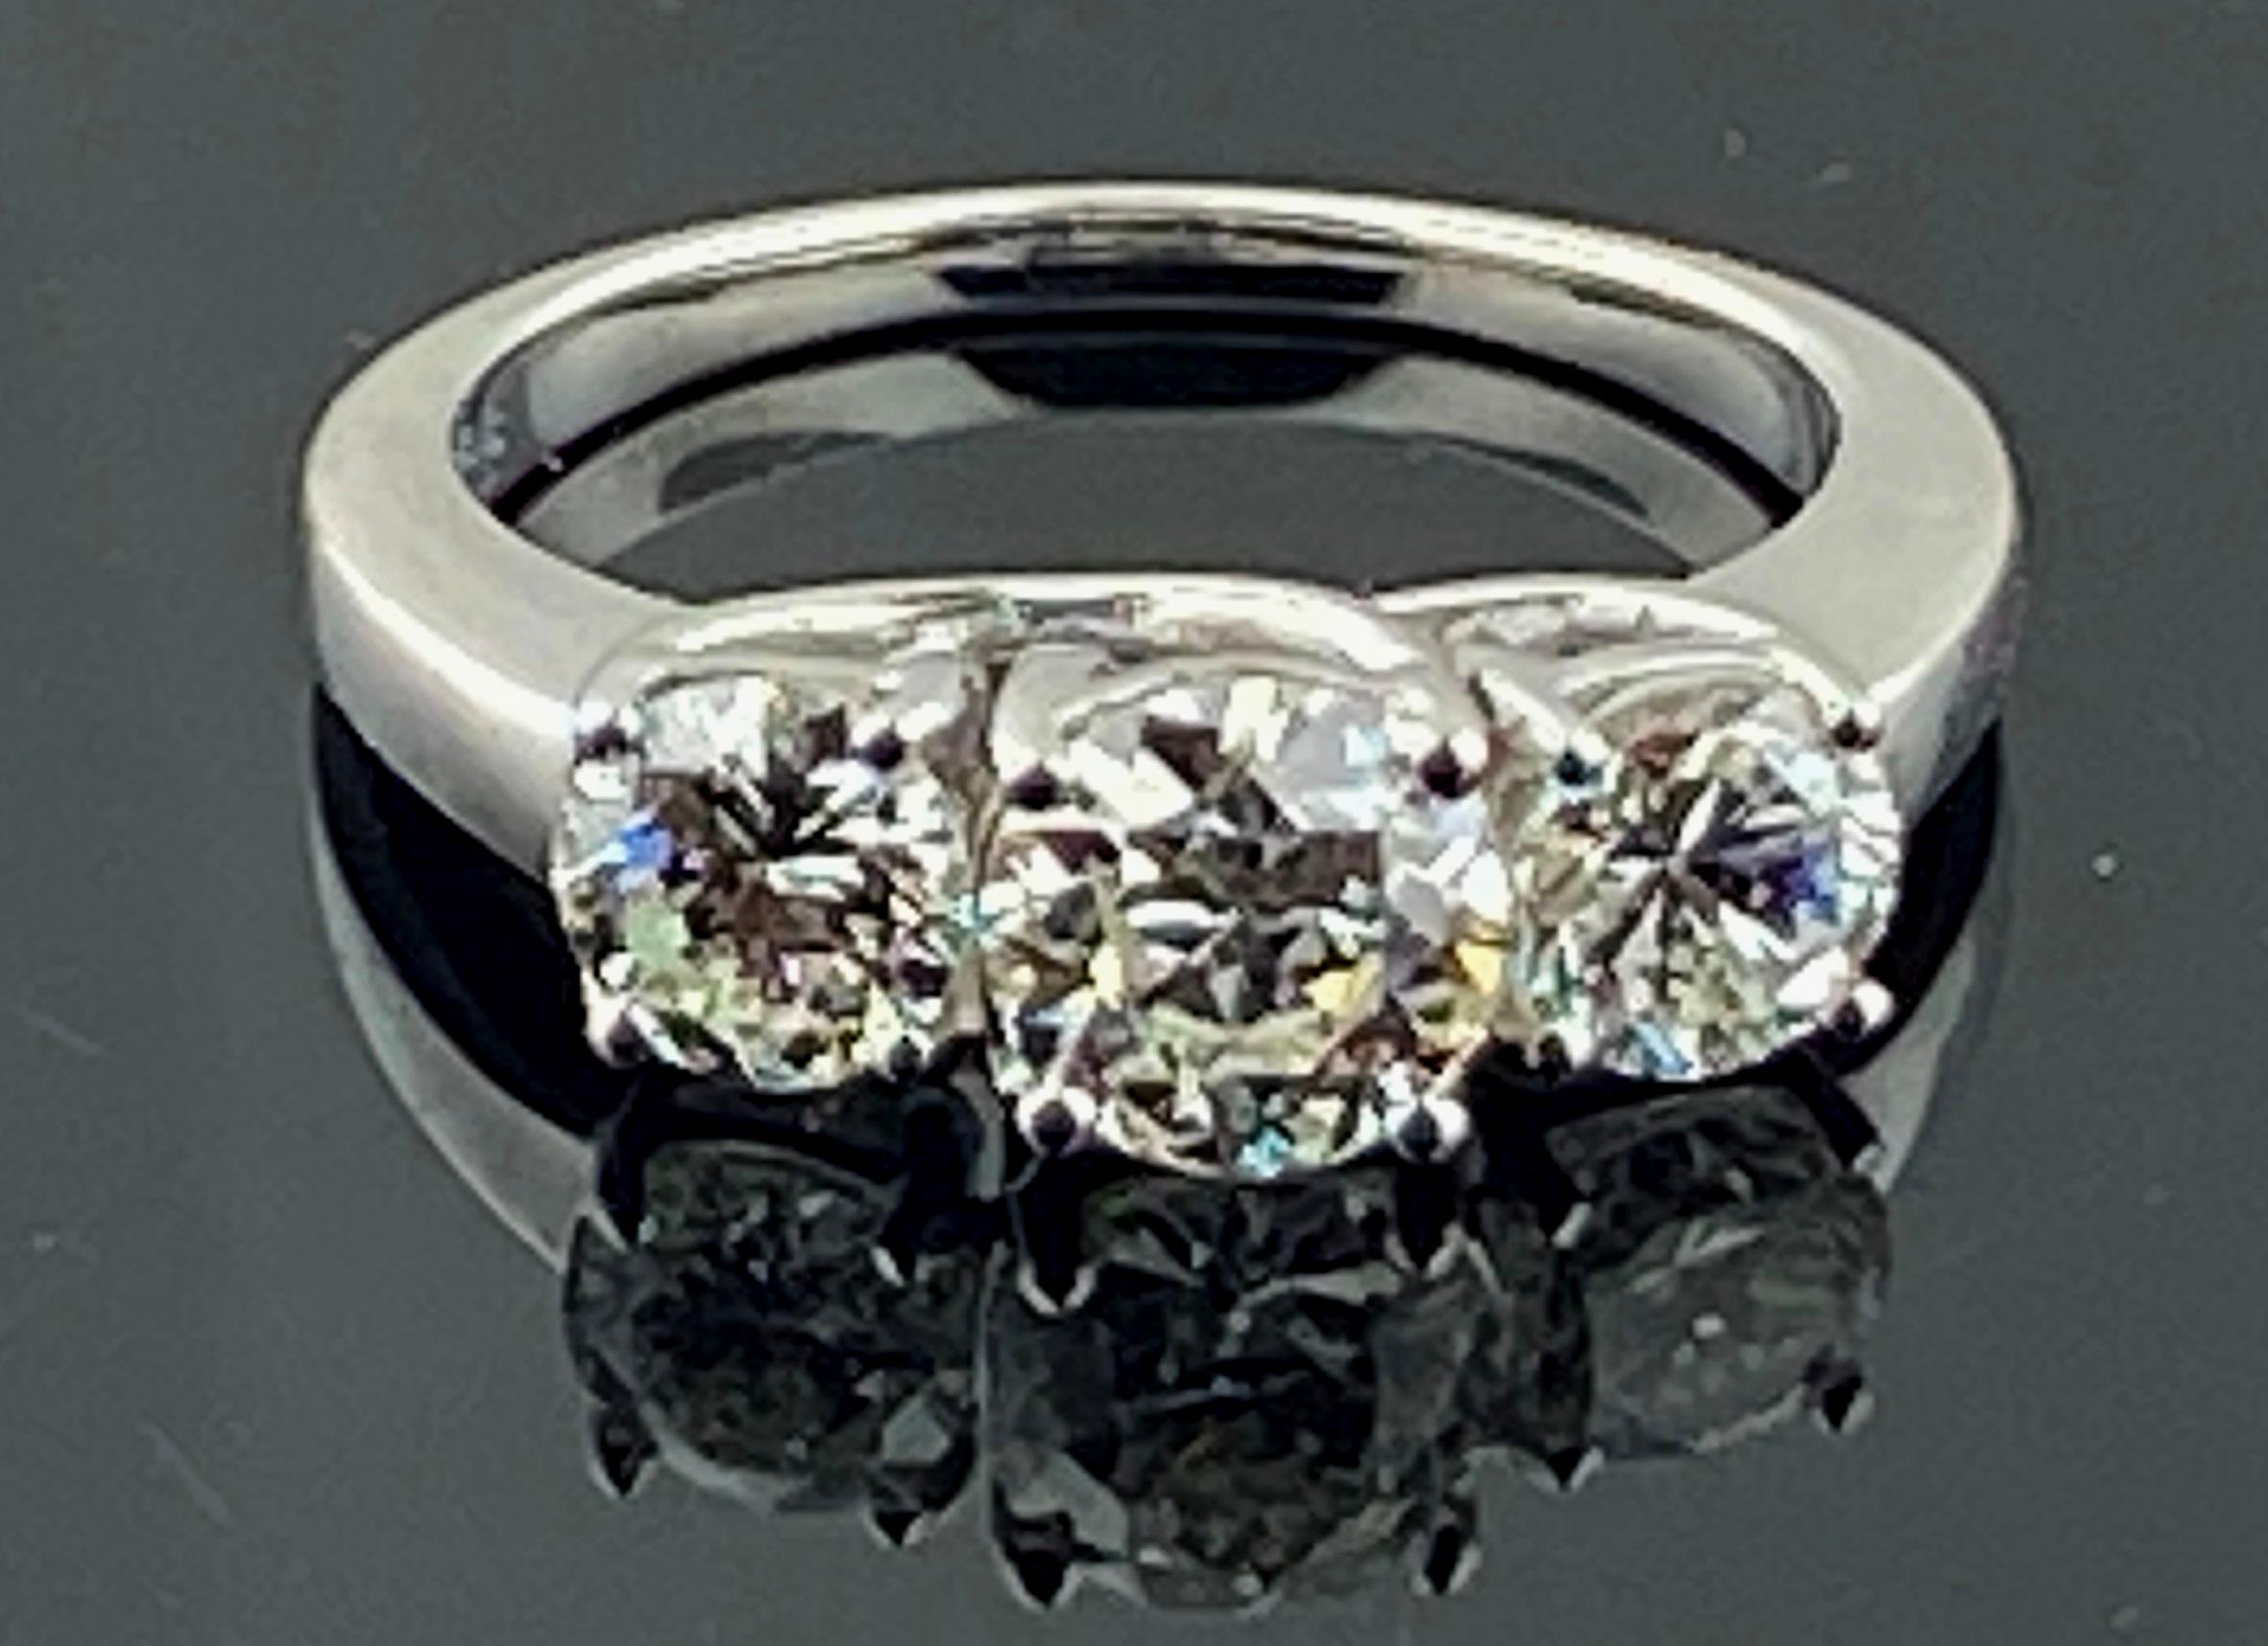 Set in 18 karat white gold, weighing 6.10 grams, are three round brilliant cut diamonds.  The center diamond is 1.08 carats, Color: H-I, Clarity: SI-2, on one side the diamond is 0.68 carats, Color: G-H, Clarity: SI-2 and on the other side the